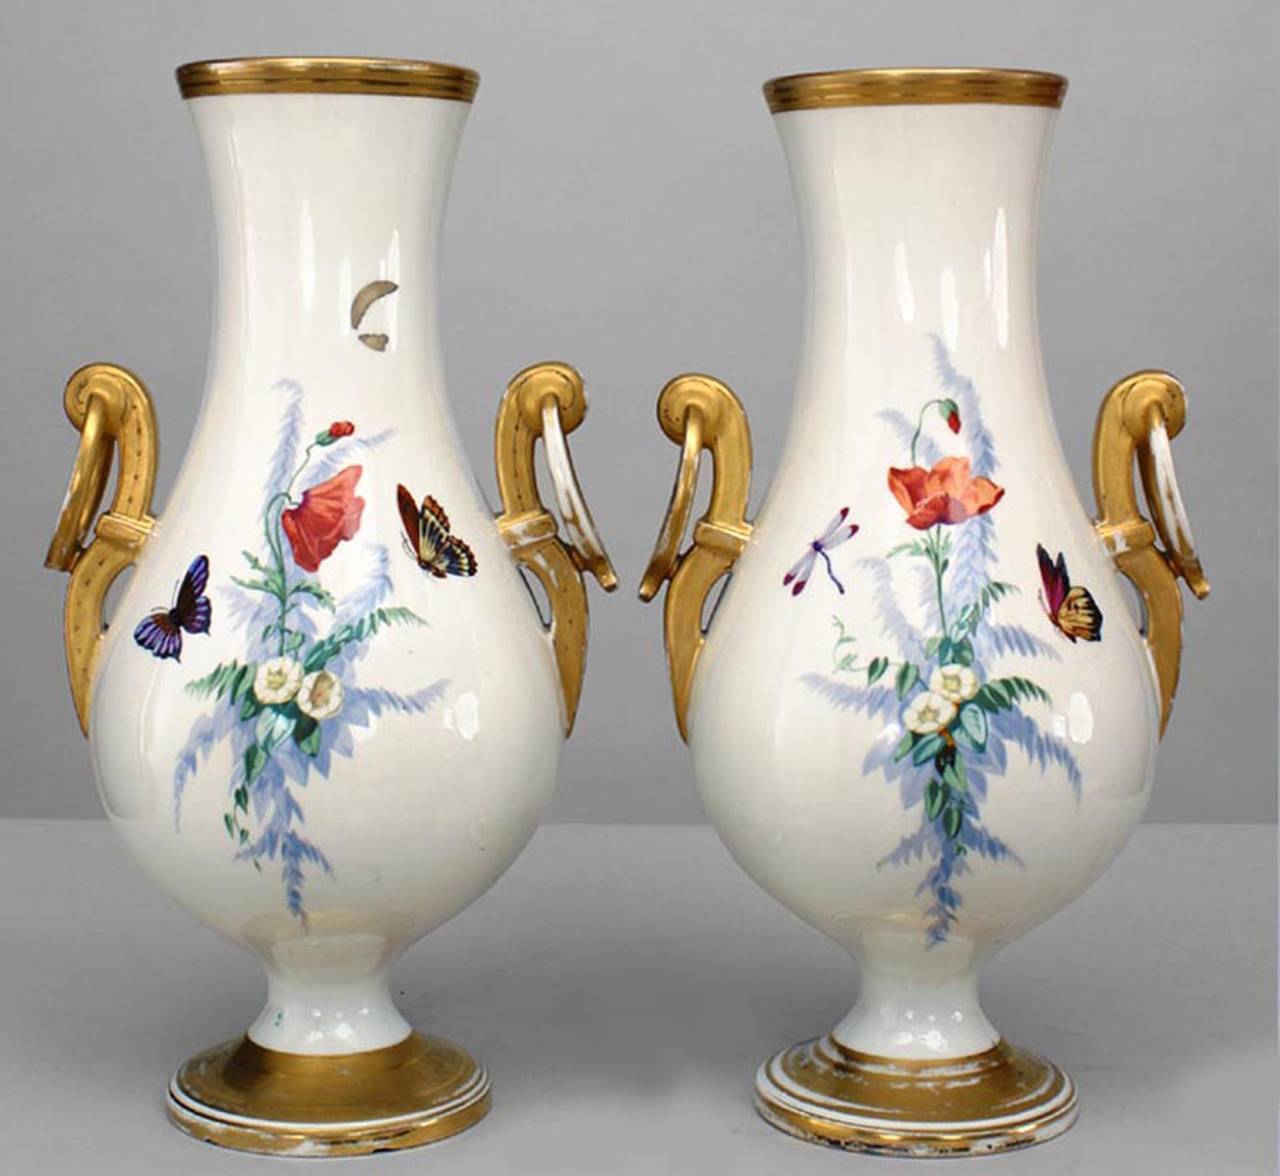 Pair of 19th century French white and gold porcelain vases decorated with poppies and insects with ring-form handles.